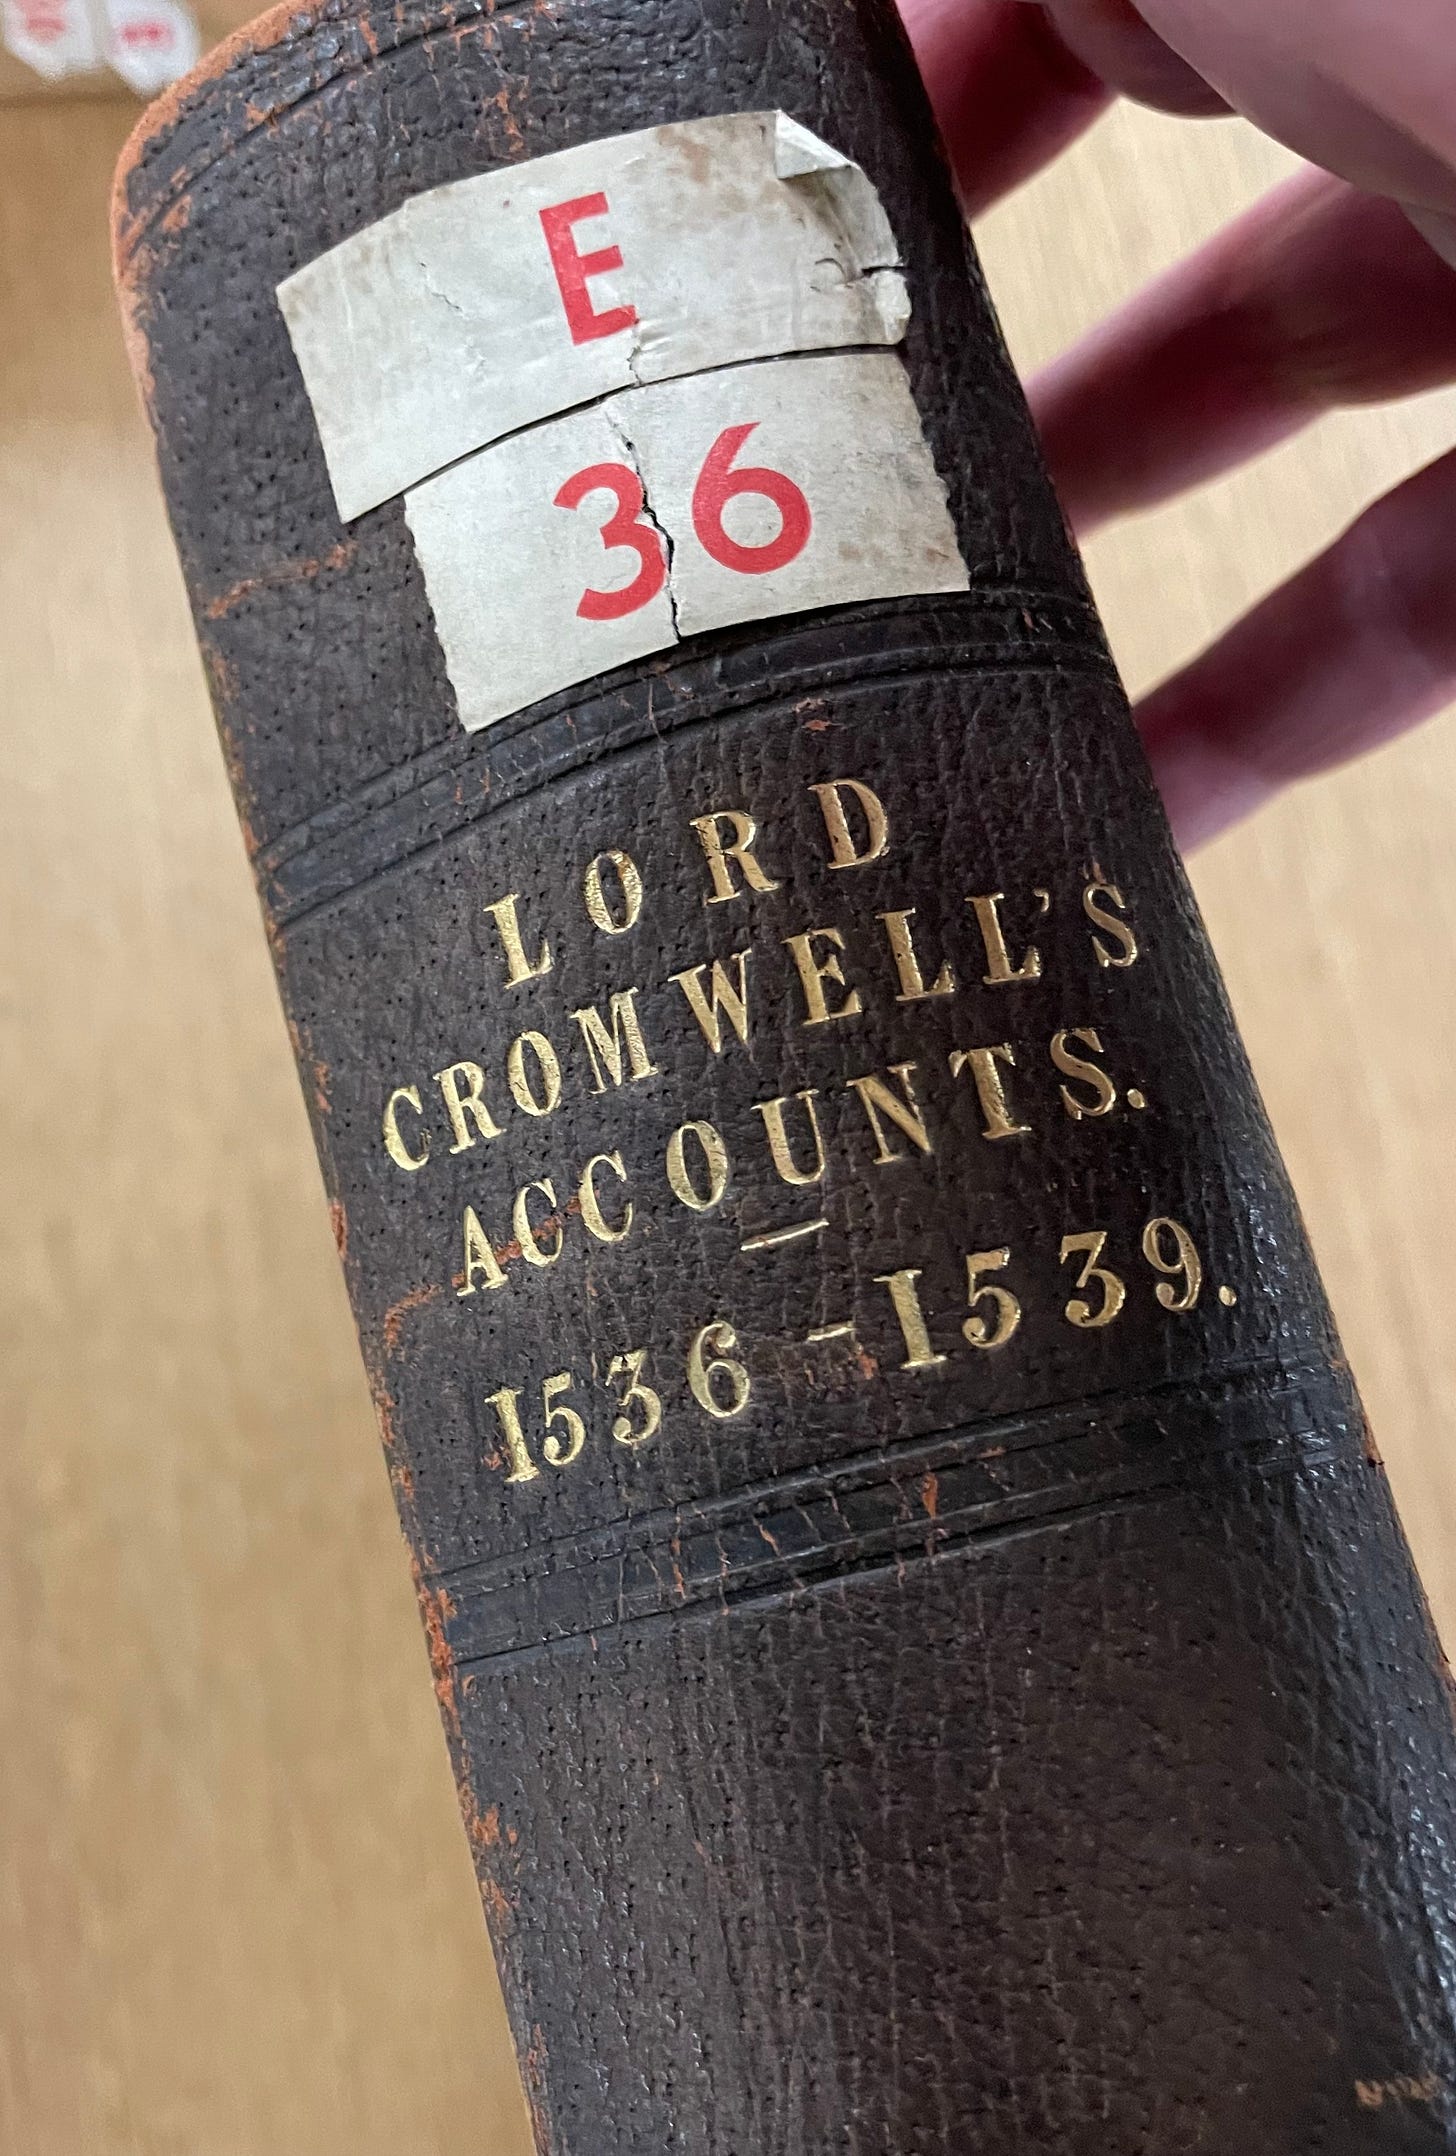 A hand holds a large leather bound book, with Lord Cromwell’s Accounts 1536-1539 tooled in gold on the spine